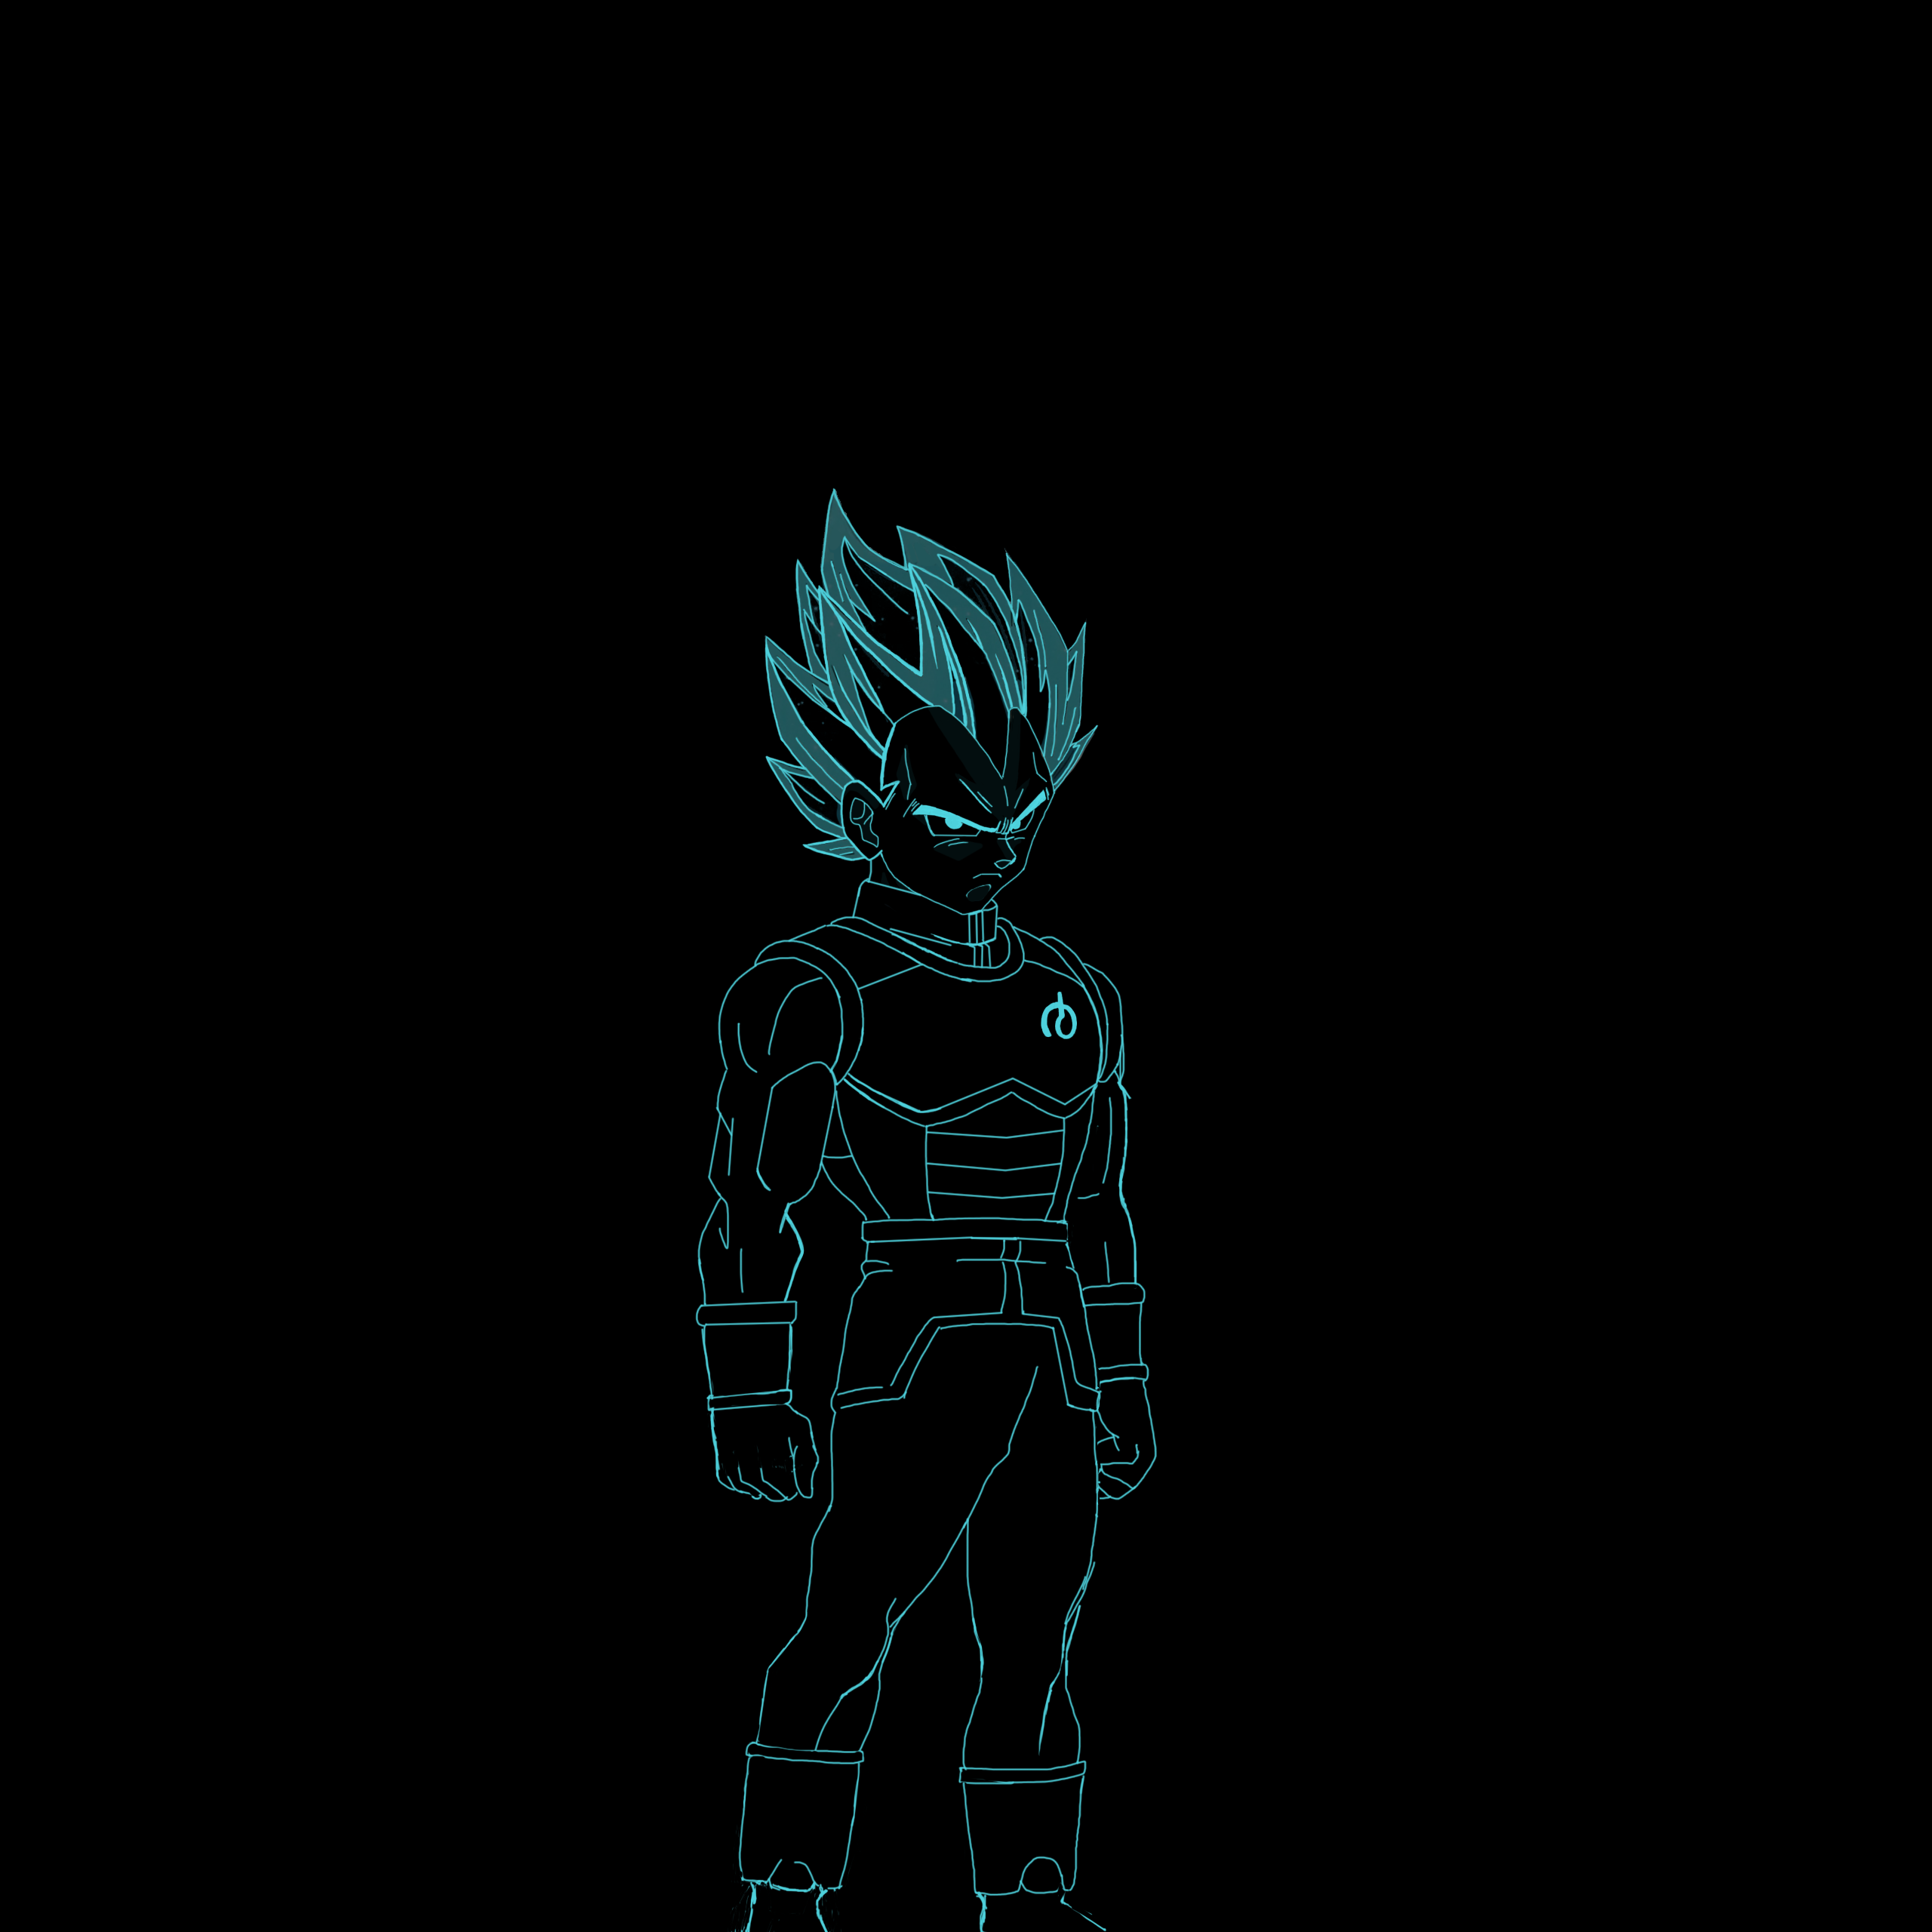 I Made A Wallpaper Of Ssgss Vegeta For My Nexus 6p In Photoshop Dbz